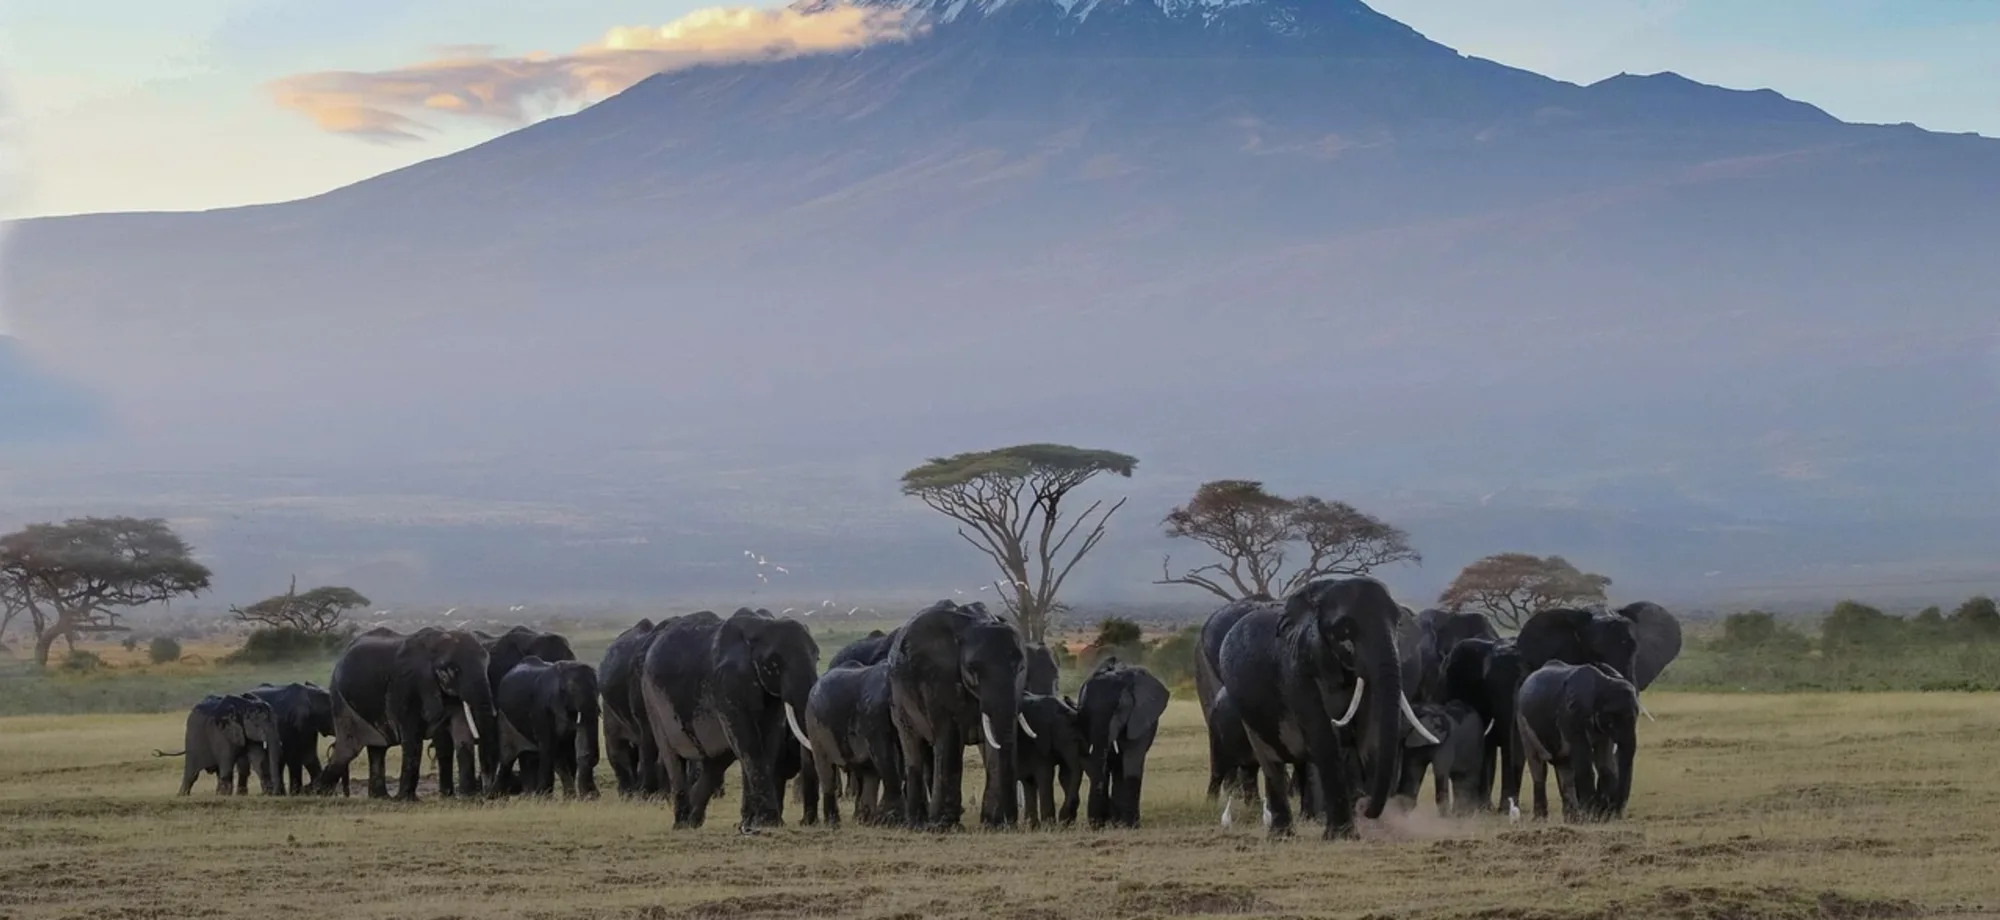 Elephants in front of a snow-capped volcano in Amboseli, Kenya.